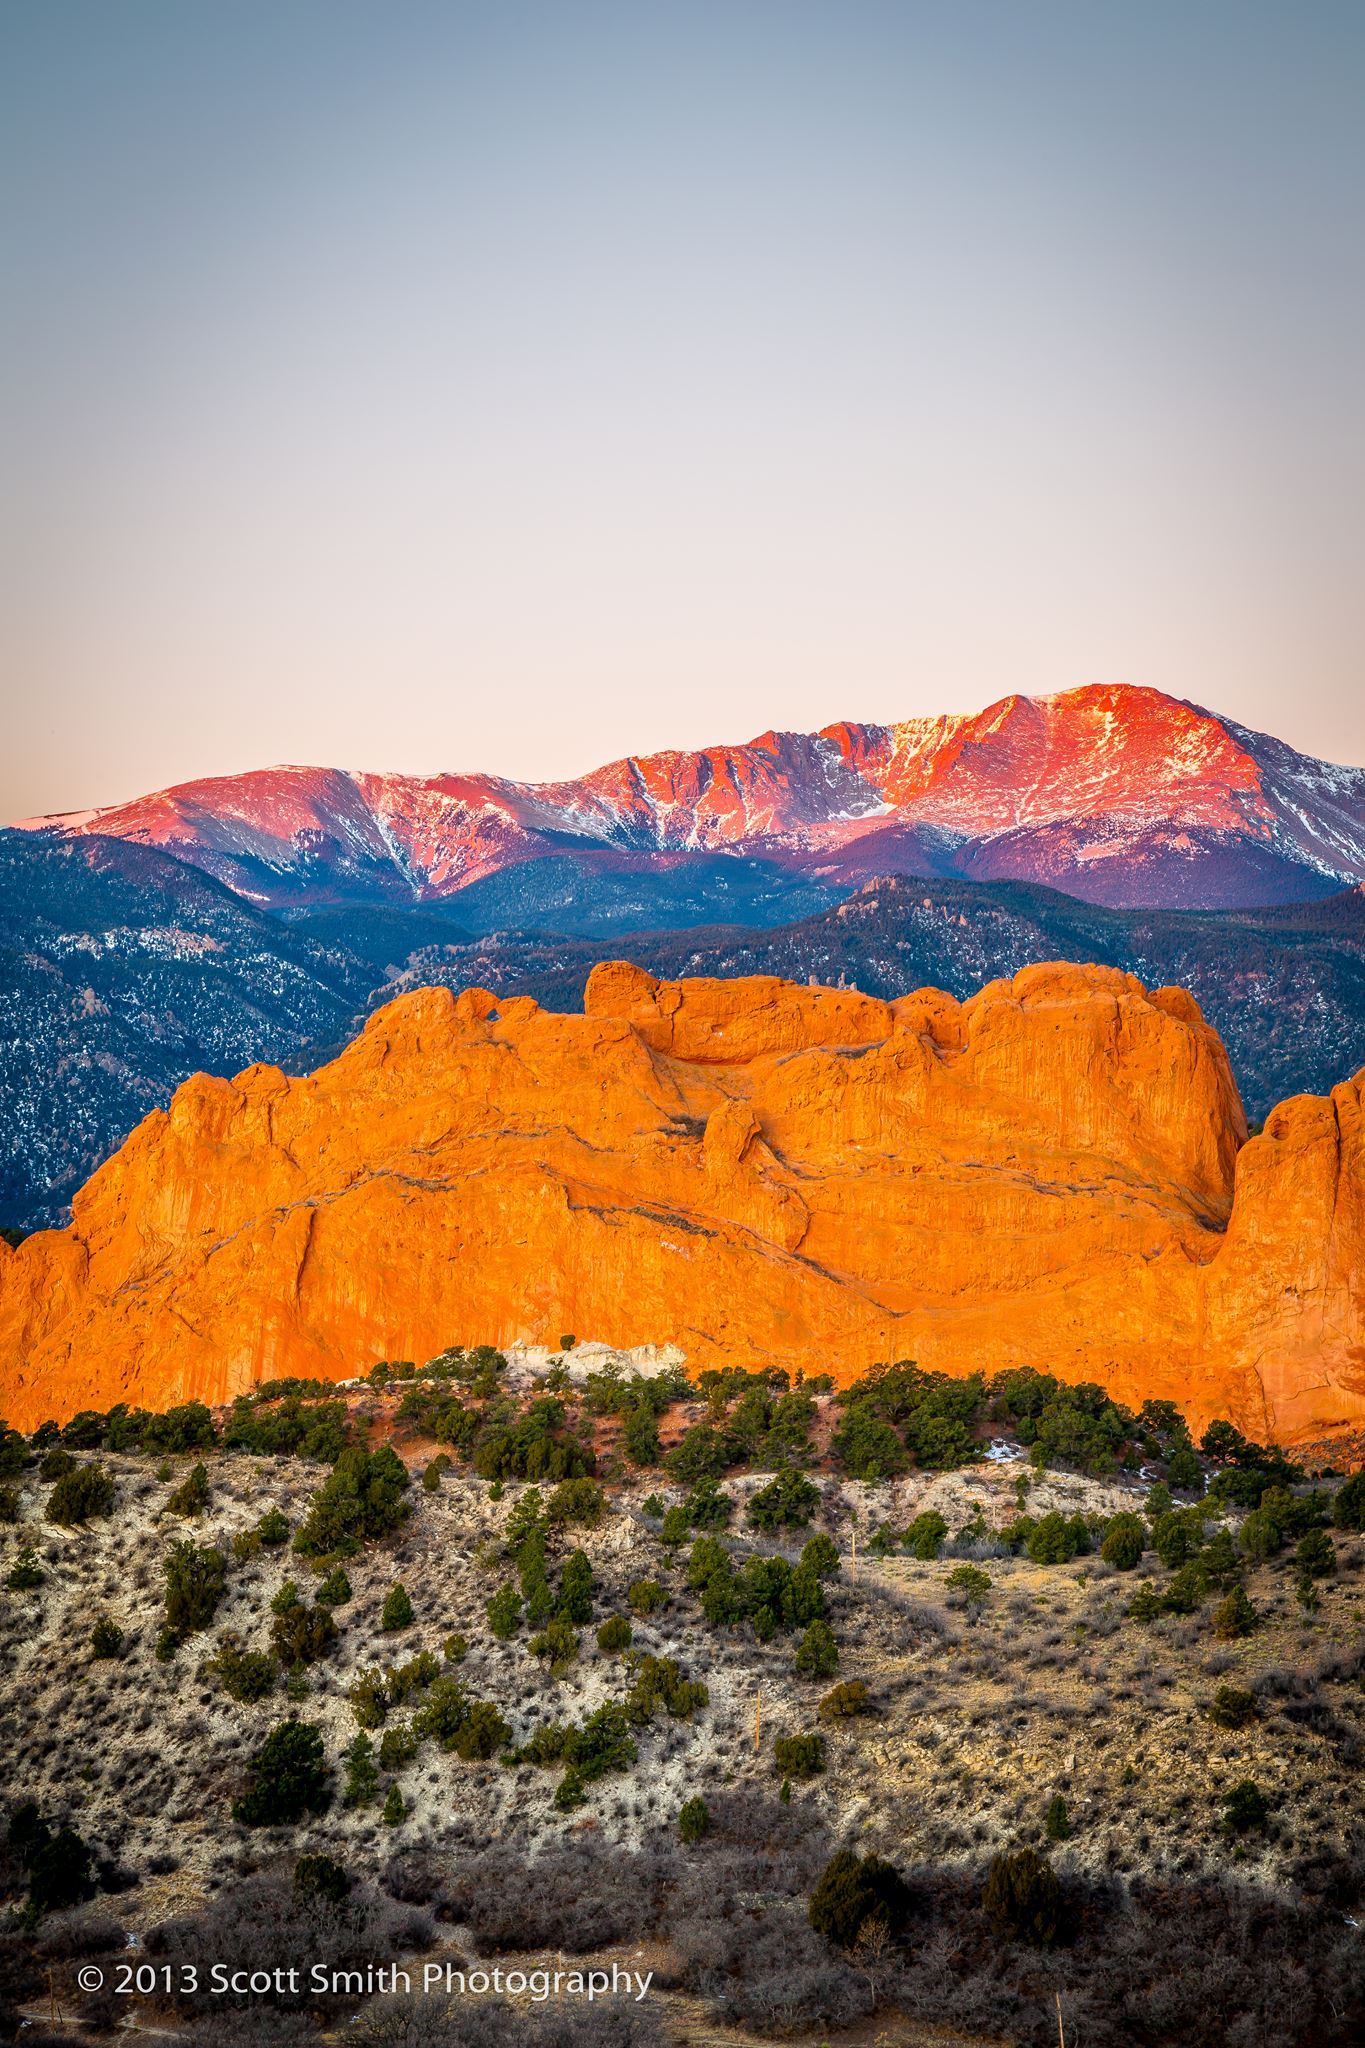 Morning Peaks Pike's Peak, behind the Garden of the Gods, lit by the rising sun. by Scott Smith Photos